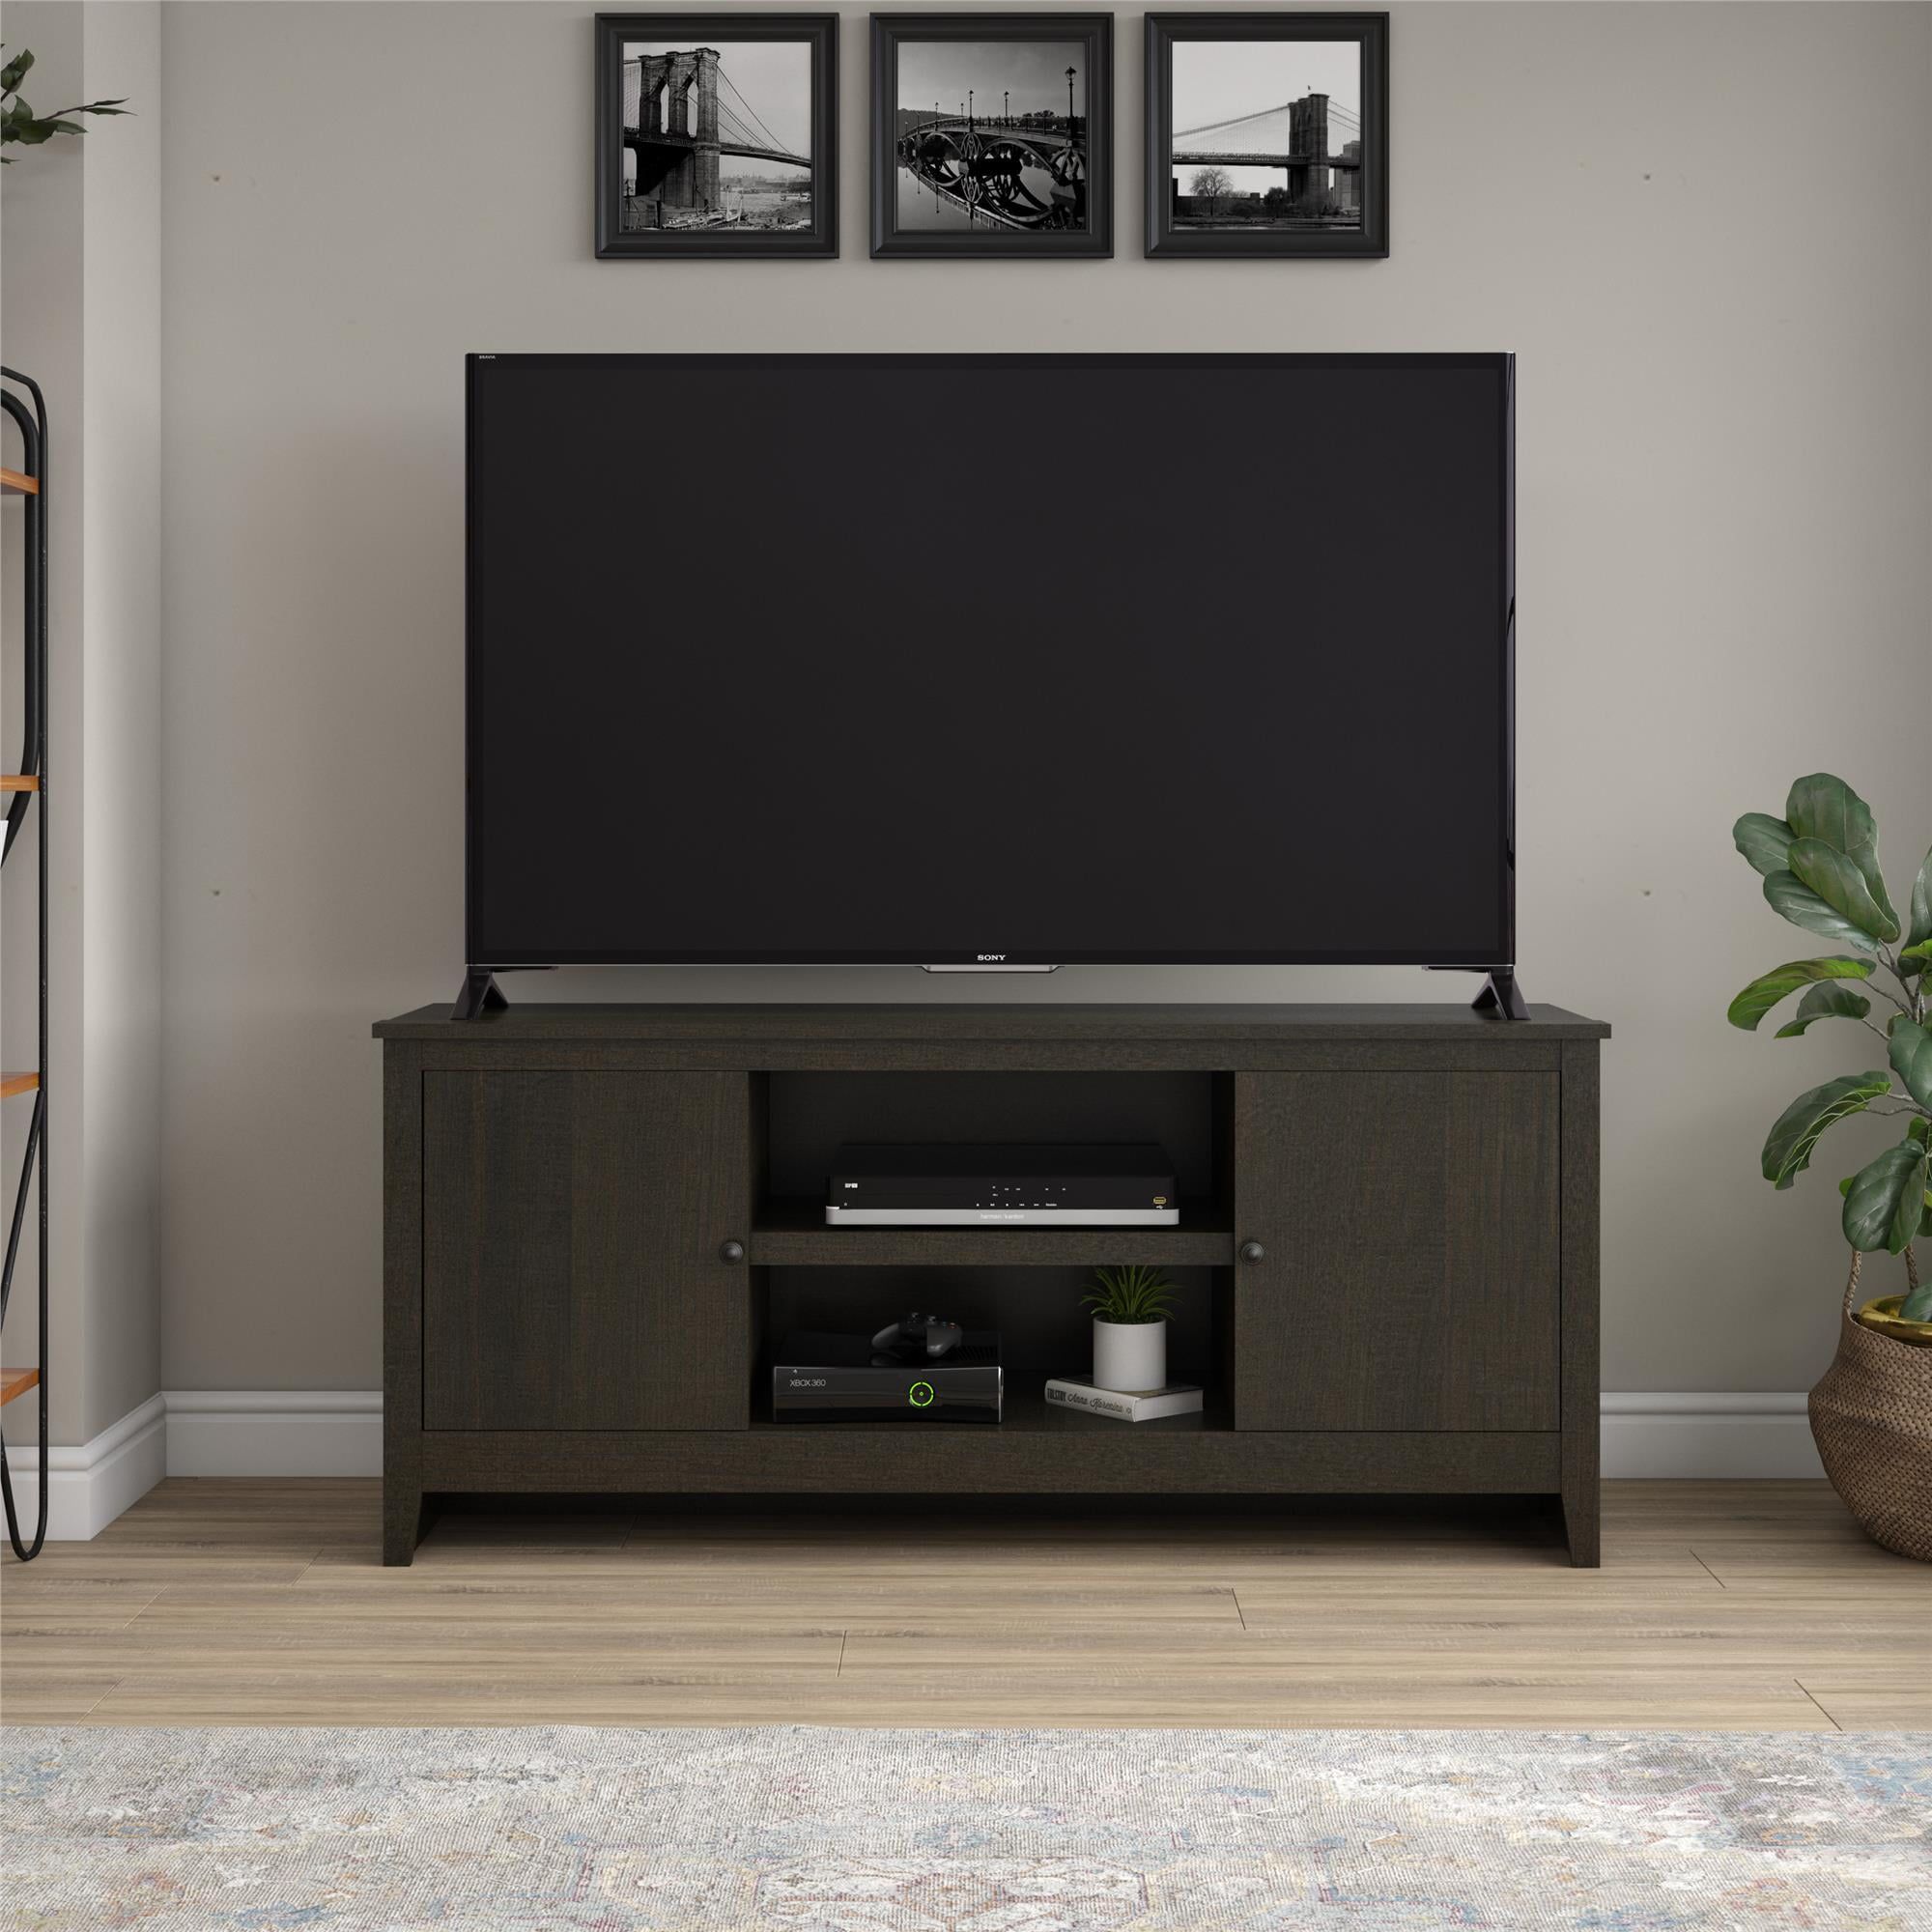 Mainstays 65" Television Stand Espresso – Walmart Inside Cafe Tv Stands With Storage (View 3 of 20)